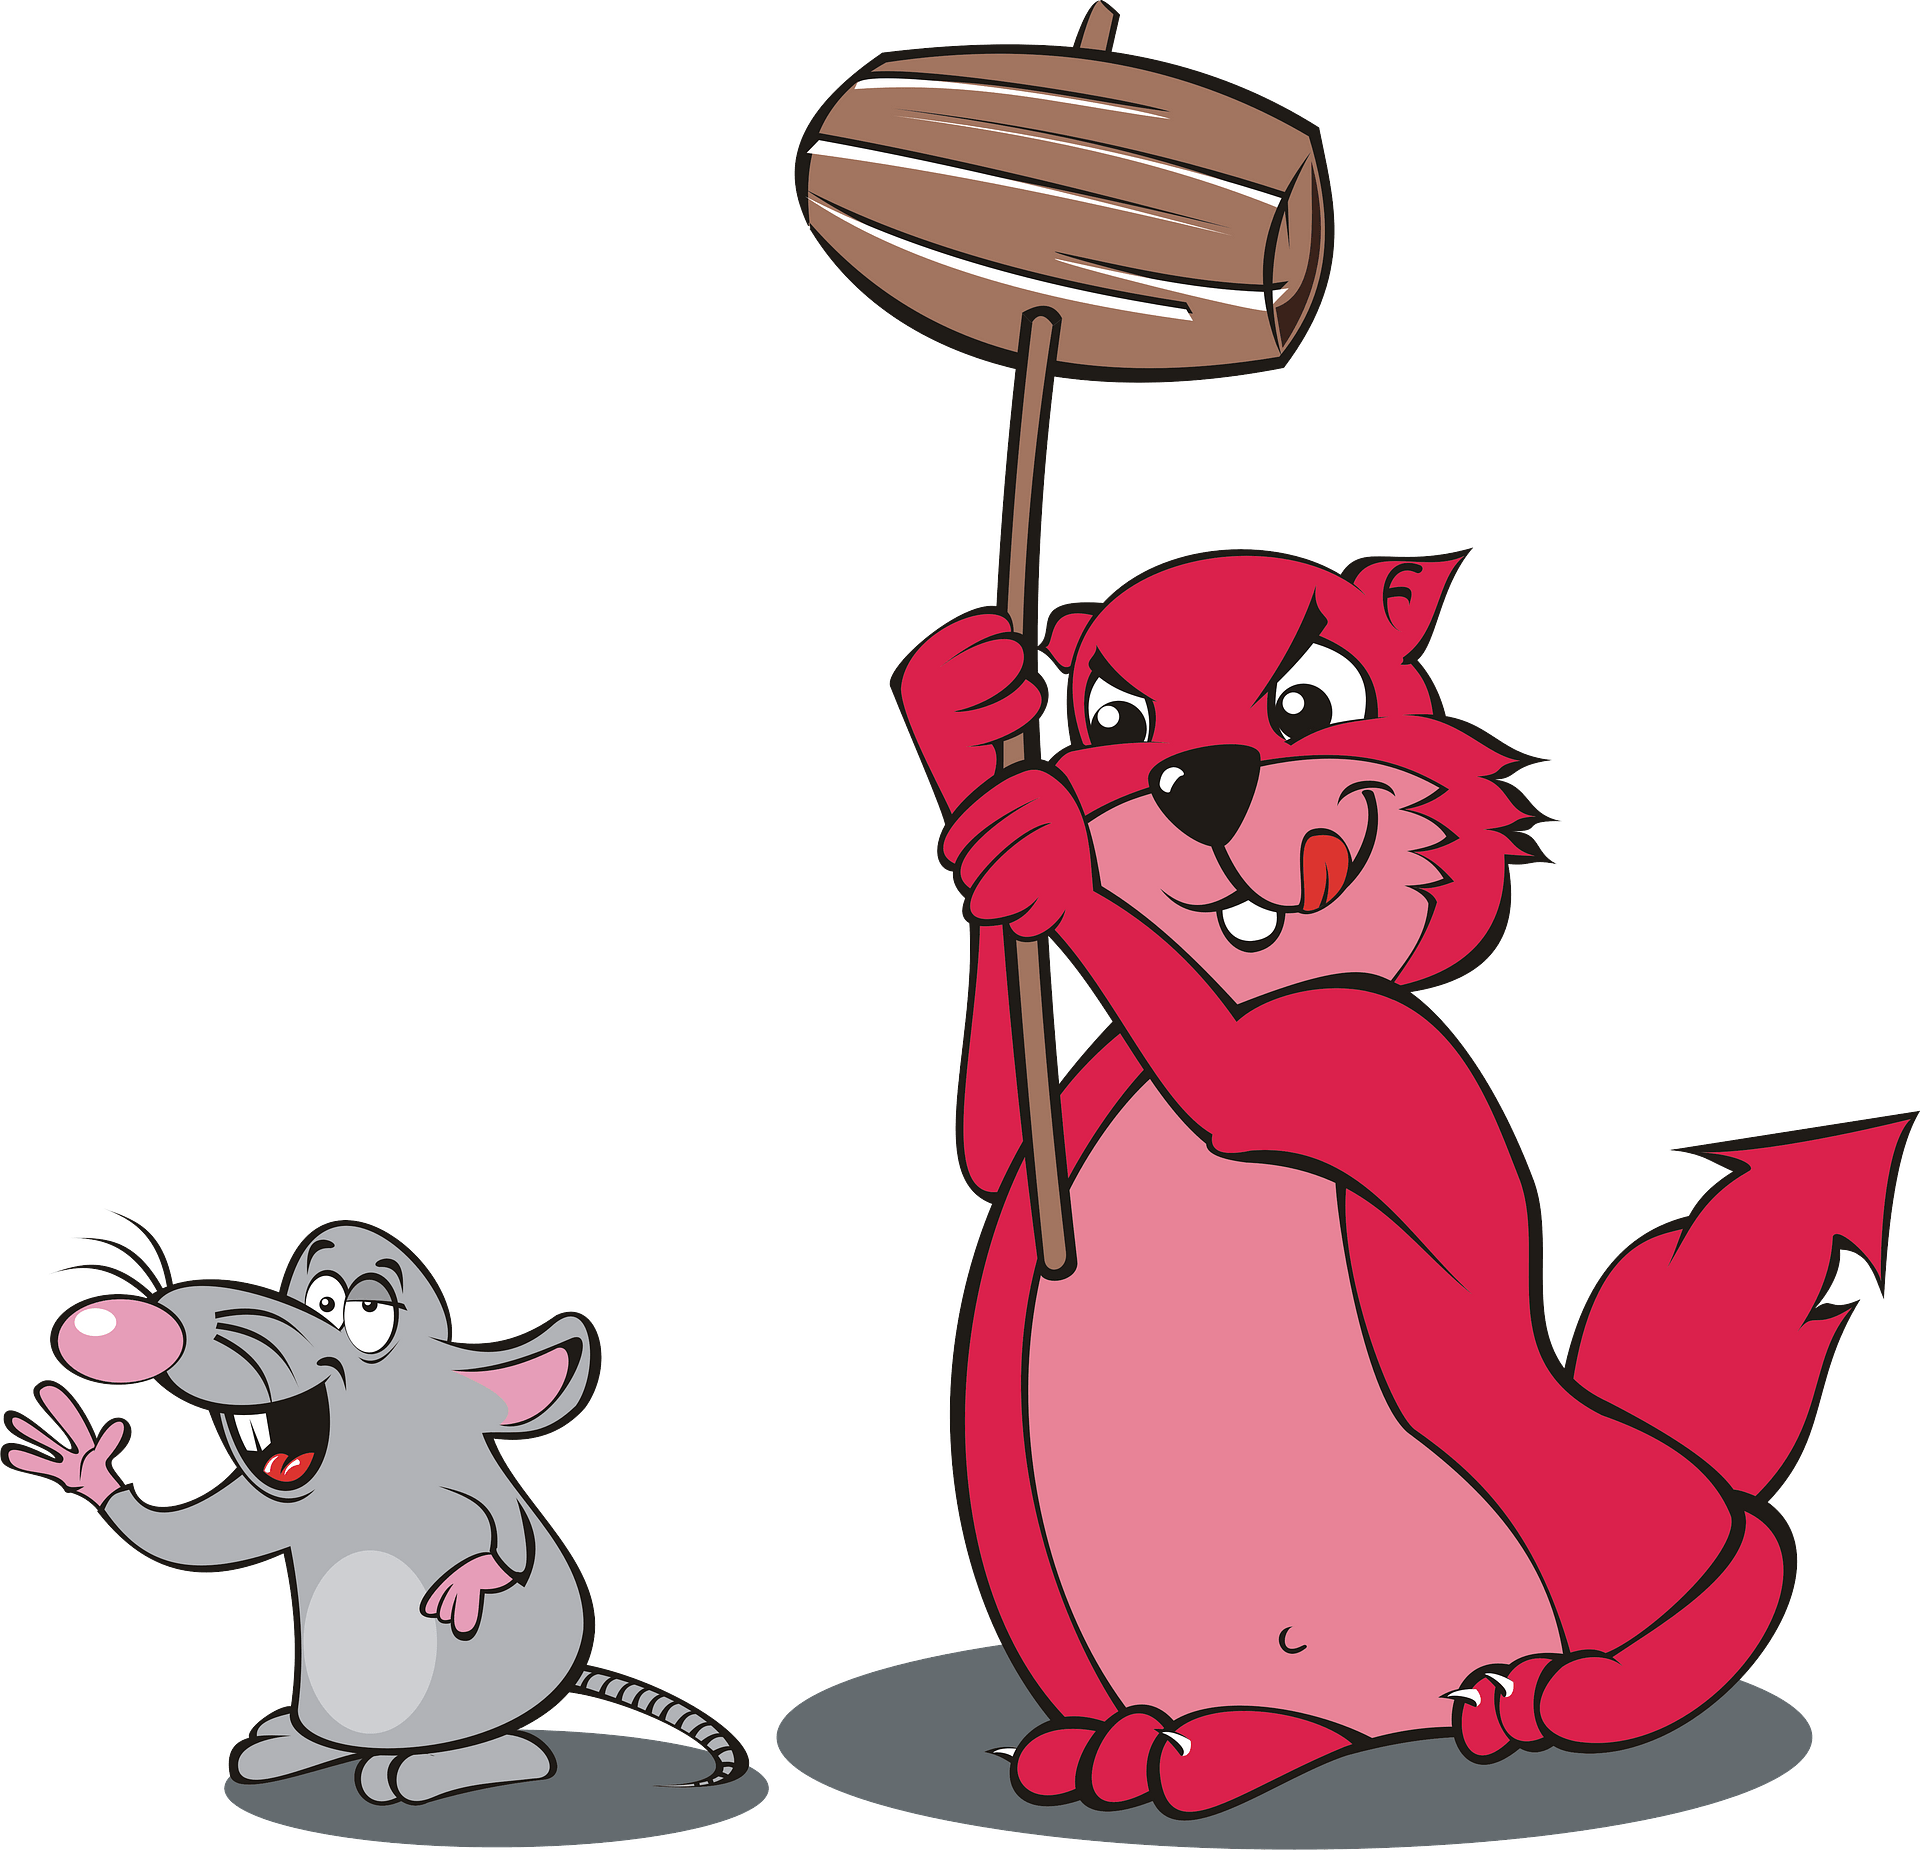 cat chasing mouse cartoon